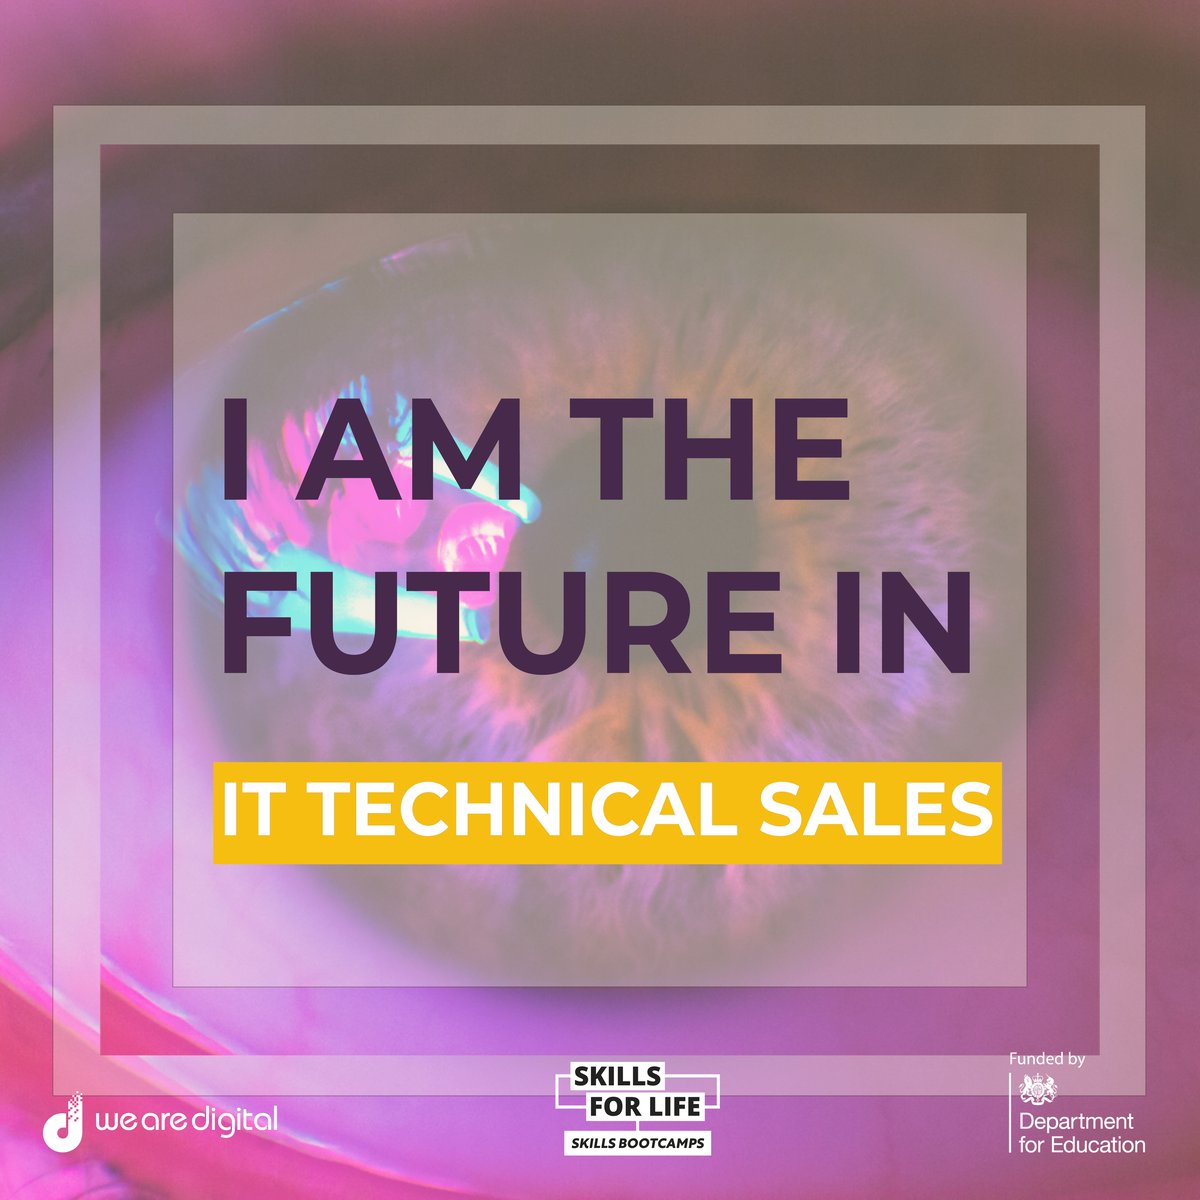 Our Skills Bootcamps in IT Technical Sales creative